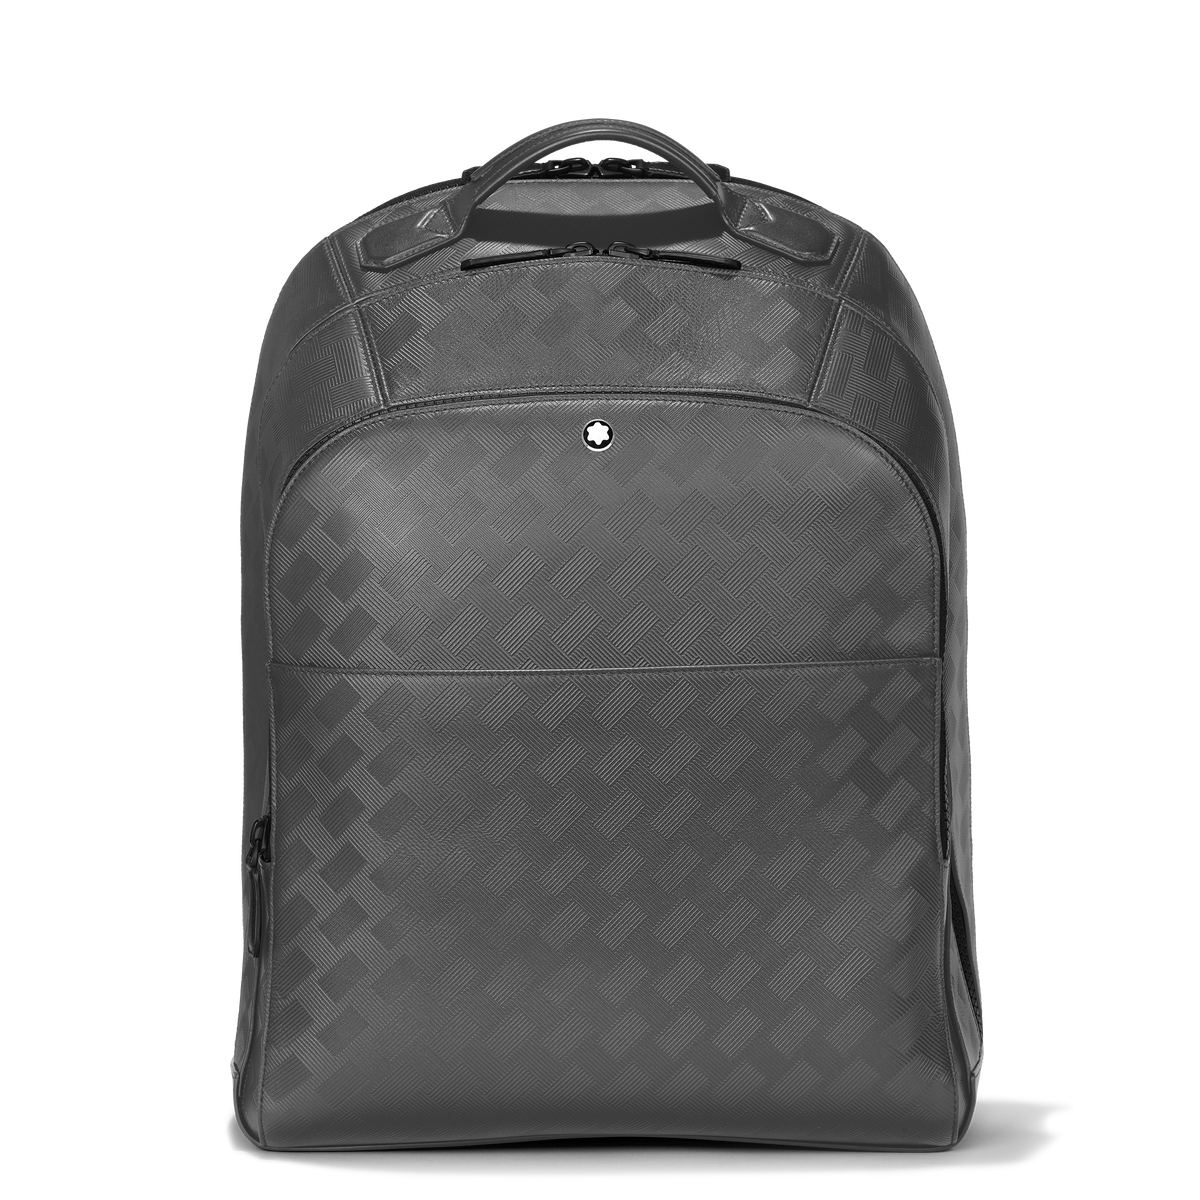 Montblanc Extreme 3.0 large backpack 3 compartments